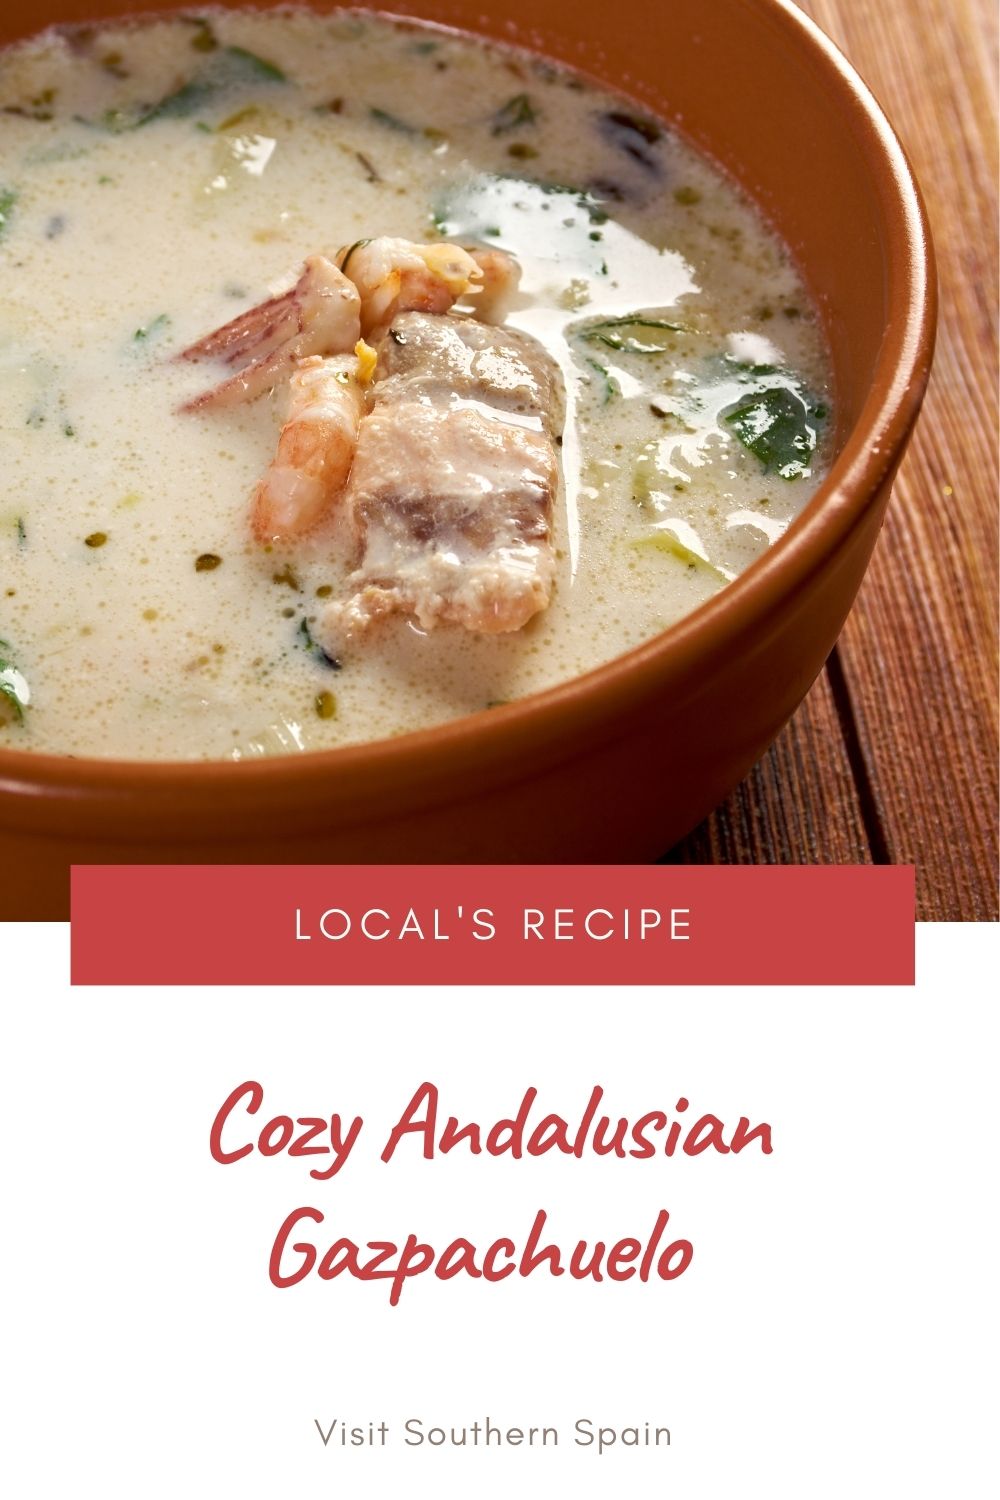 Do you want to try a cozy Andalusian Gazpachuelo recipe? This delicious recipe is what you'd describe as comfort food. The fish chowder is just perfect for the cold days, as it's a hot Spanish soup. The fish soup recipe is easy to make, doesn't require many ingredients, and the best part, it has a creamy consistency thanks to the mayonnaise. This soup is also known as gazpachuelo malagueño since it originates from Malaga. Try this savory soup now! #gazpachuelo #andalusiansoup #fishsoup #chowder